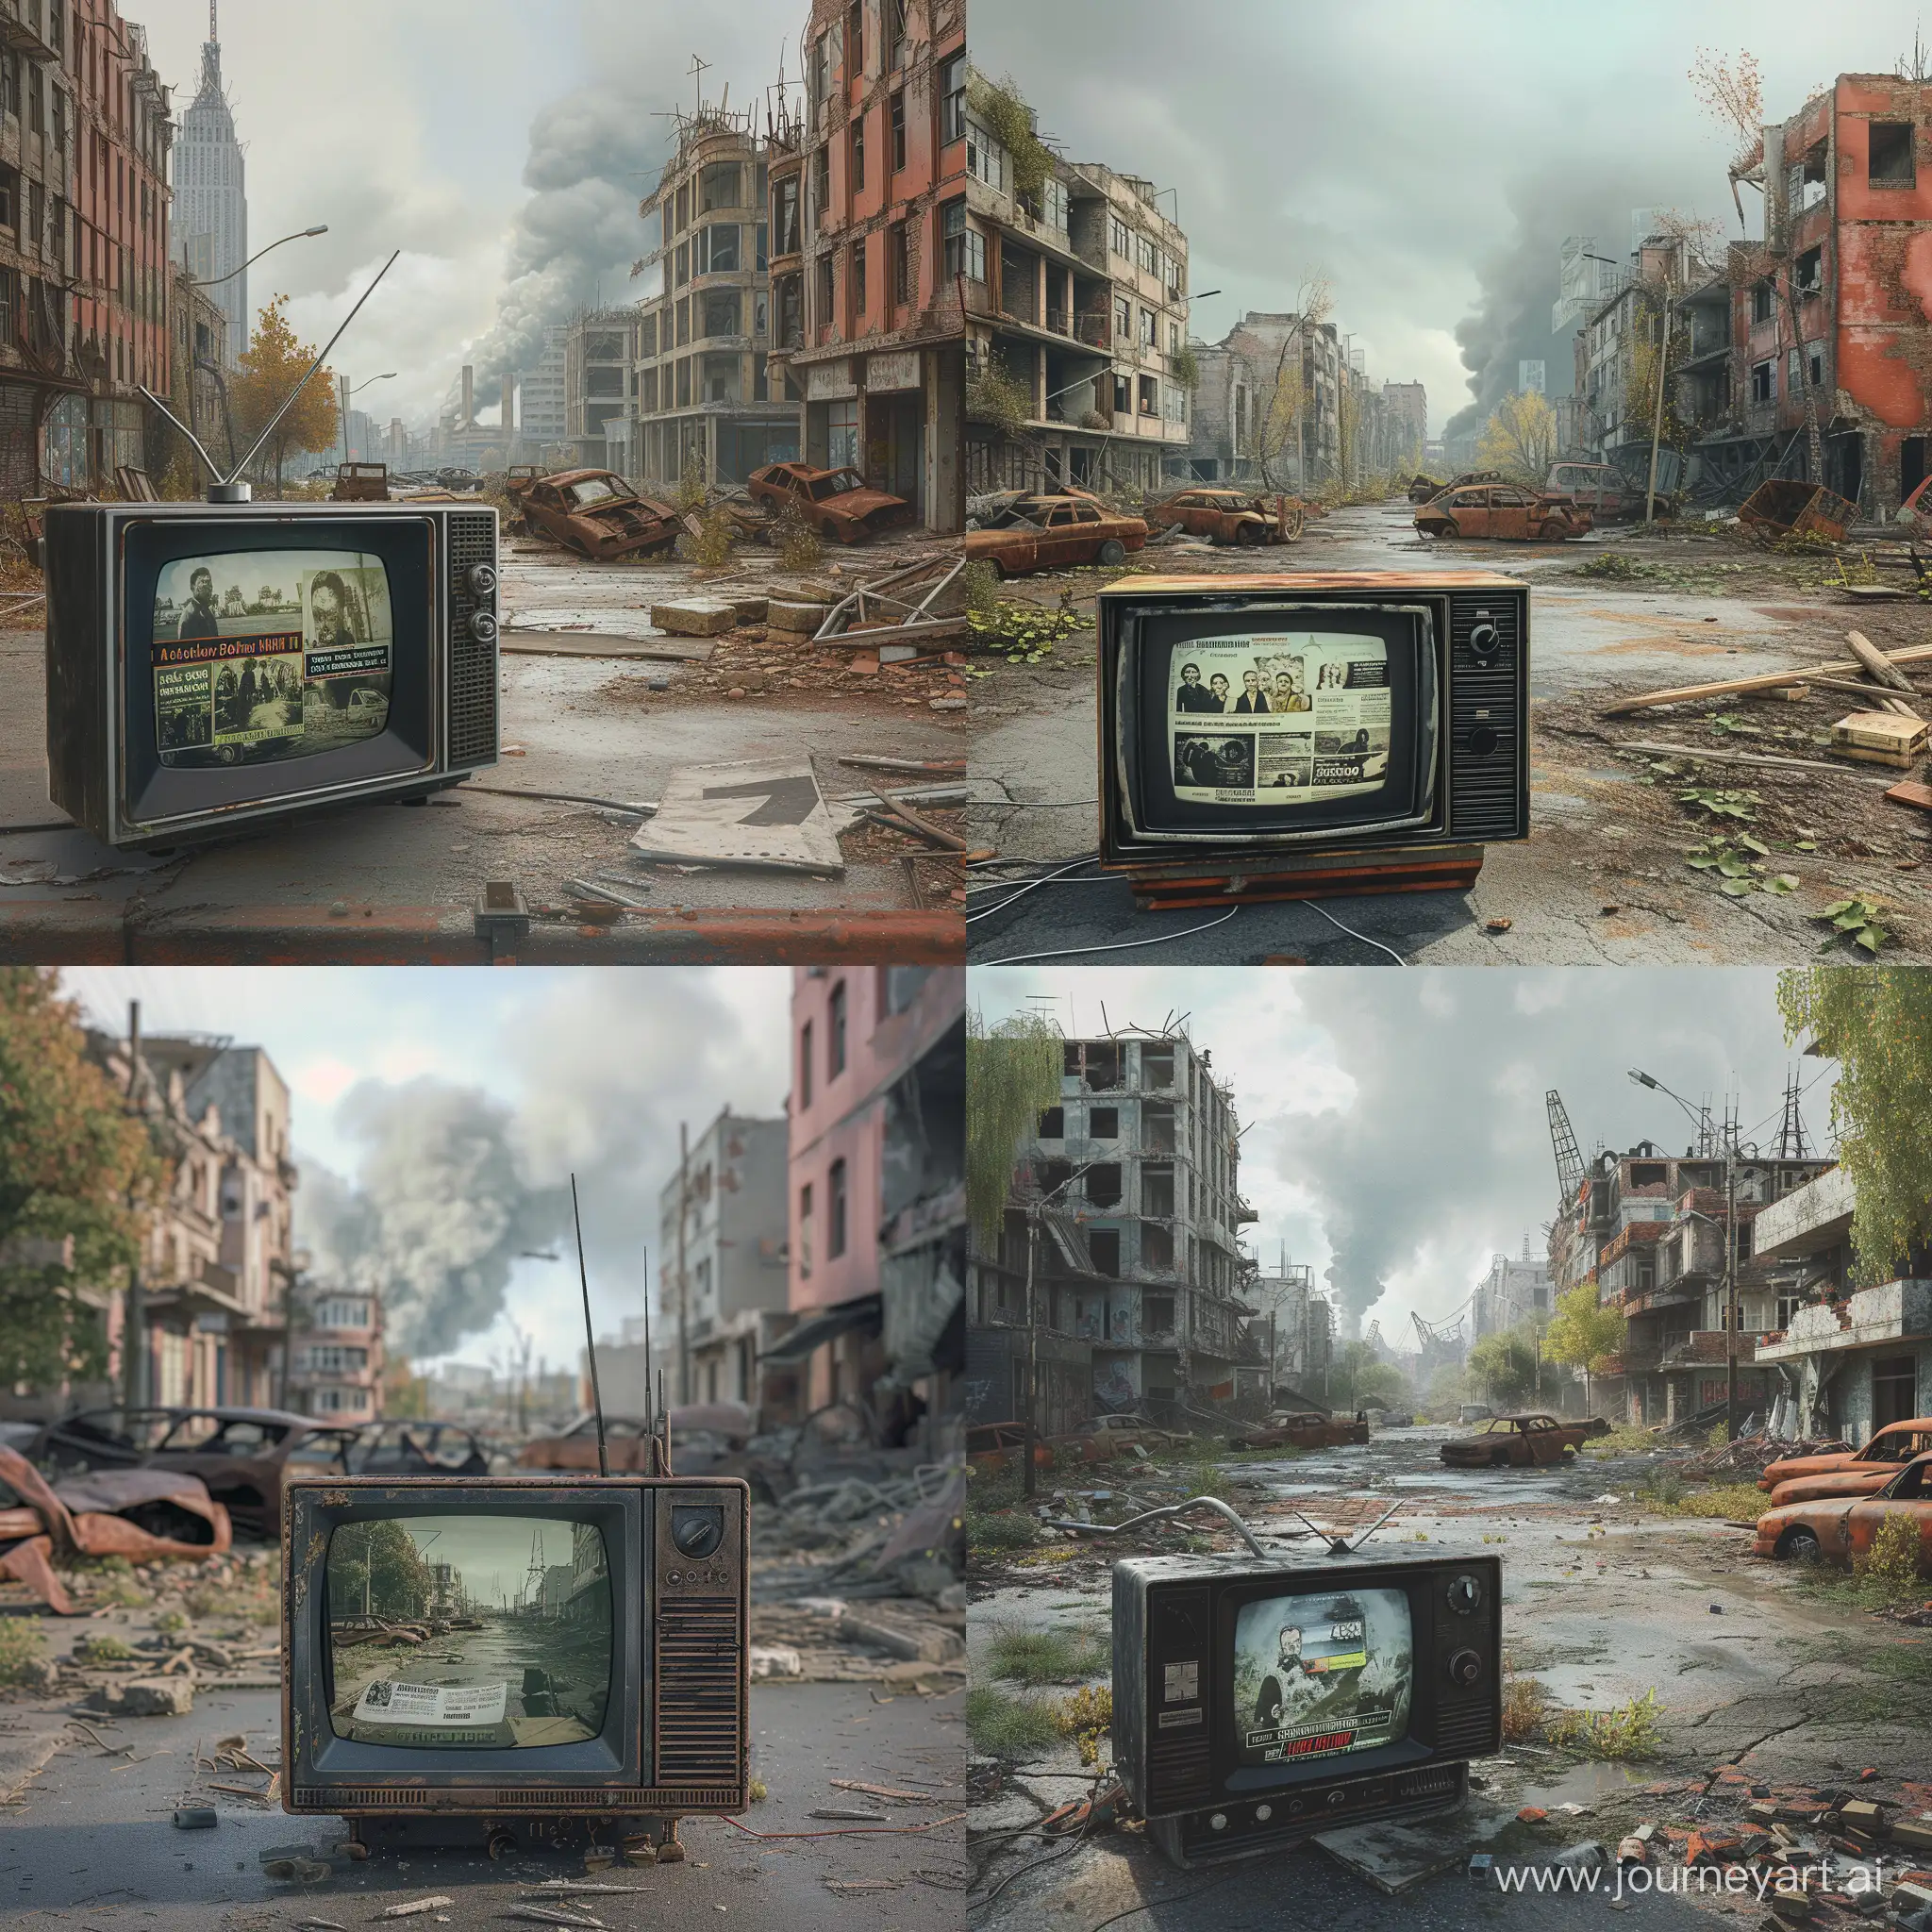 PostApocalyptic-Television-Broadcasting-News-of-Nuclear-Catastrophe-on-Abandoned-Street